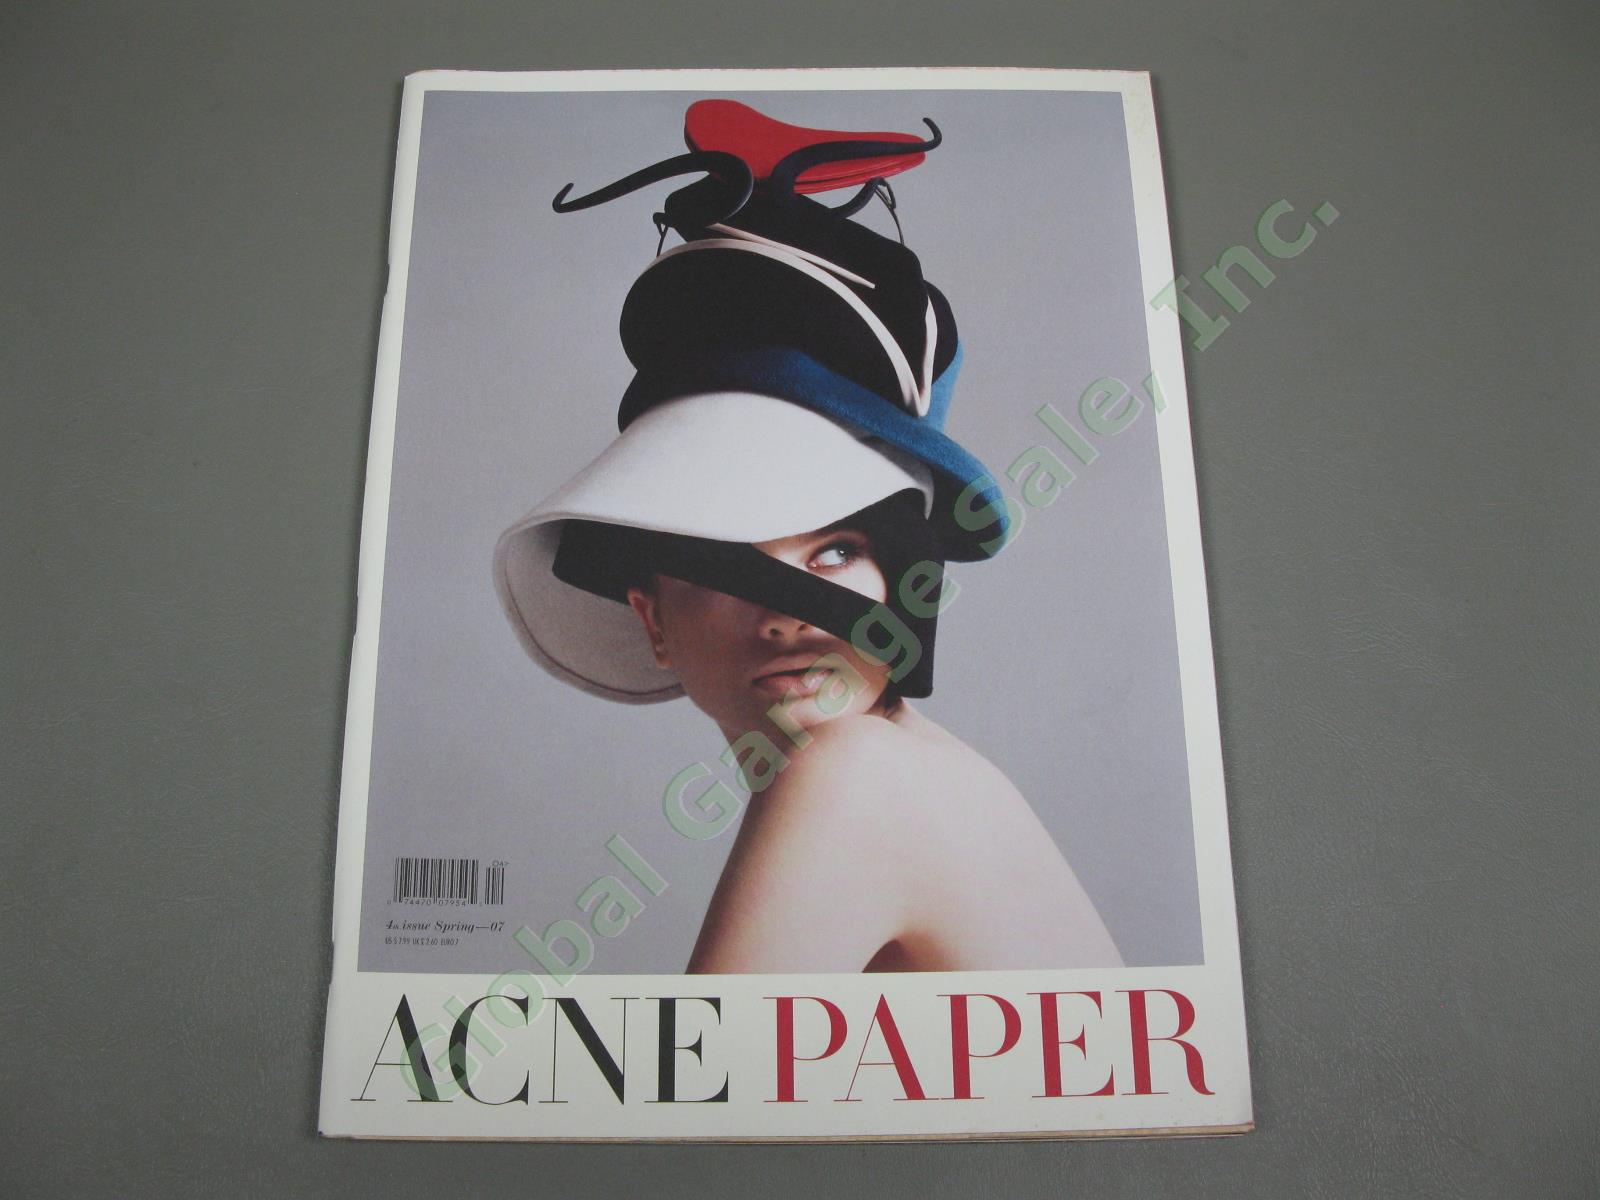 5 Acne Paper Magazines Lot 2007-2010 Issues #4-9 Photography Book Collection NR 1